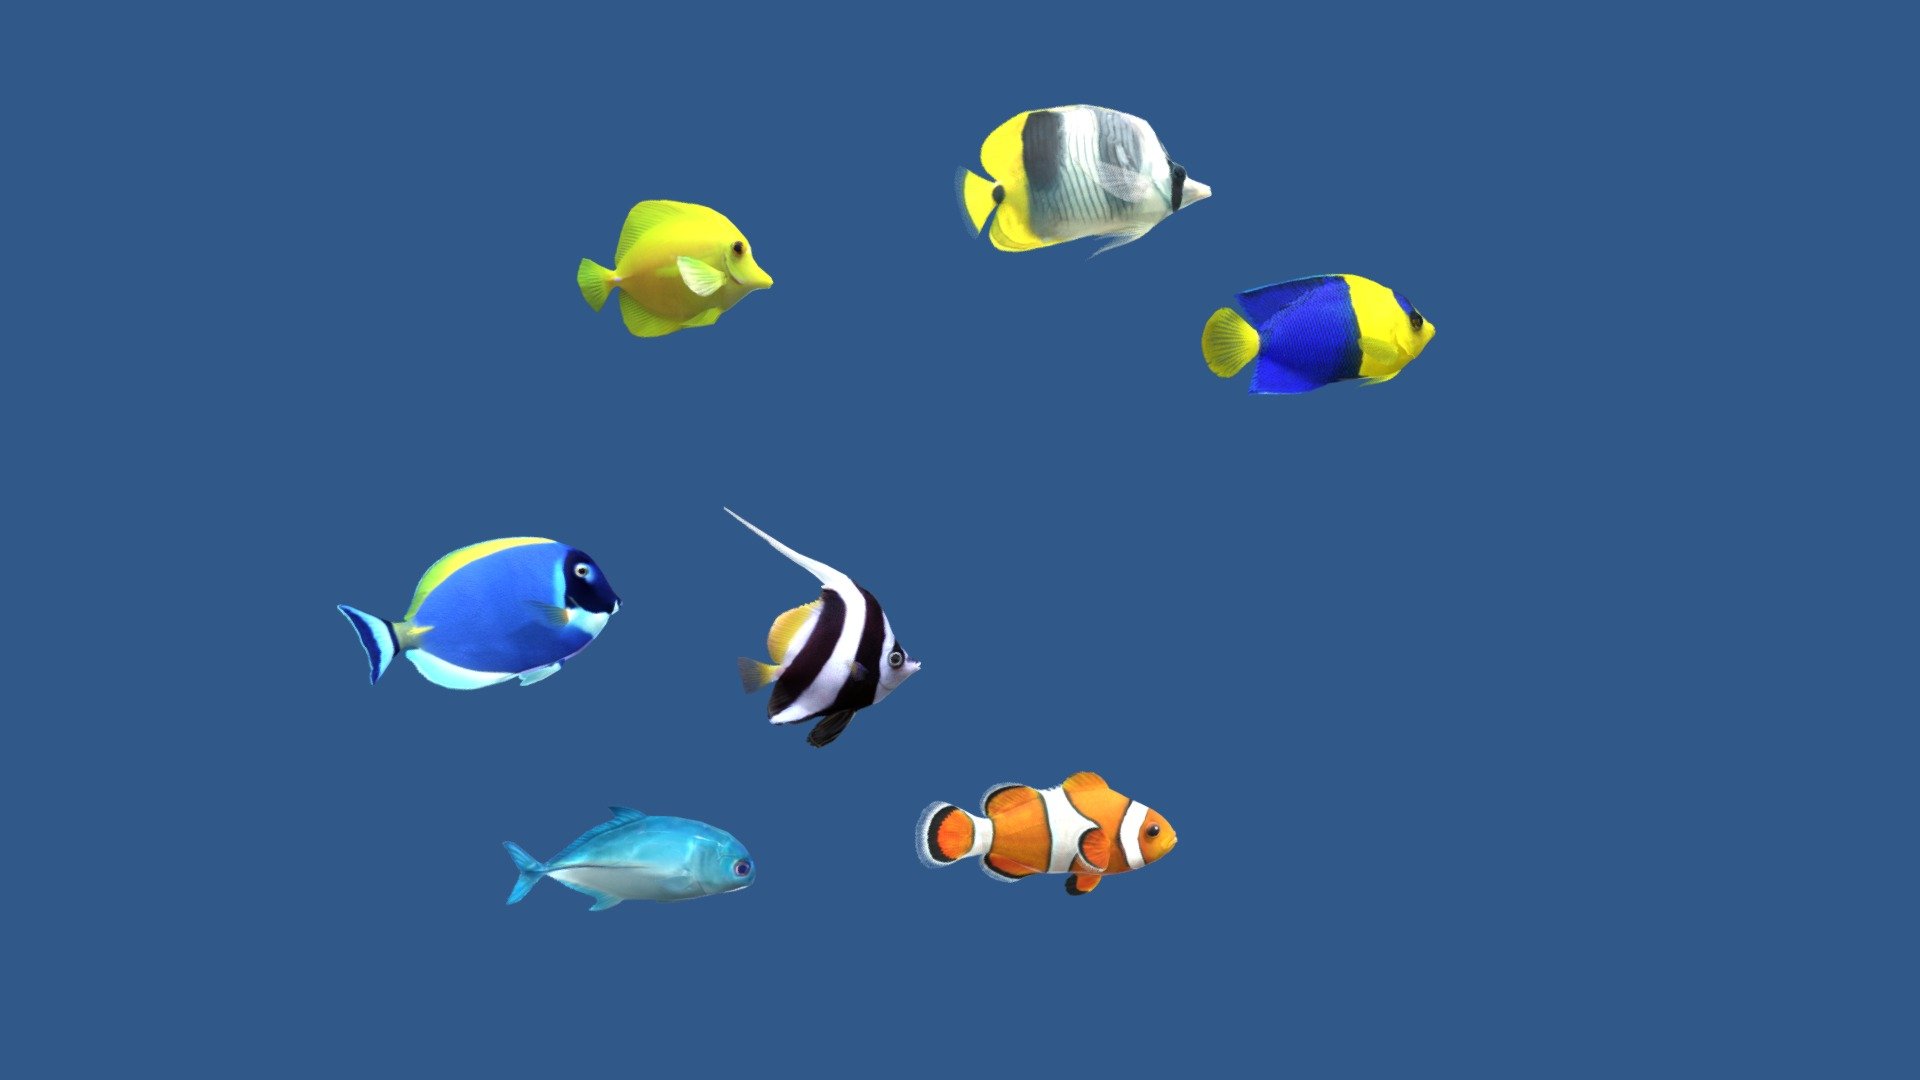 Before purchasing this model, you can free download Emperor Angelfish and try to import it. 



The pack includes 7 animated fish

Each fish has a animation loop 800 frames

1 Clownfish.................... (idle 0-800)

2 Double-Saddle fish.... (idle 0-800)

3 Powder Blue Tang ......(idle 0-800)

4 Yellow Tang .................(idle 0-800)

5 Caranx fish ..................(idle 0-800)

6 Bannerfish.................. (idle 0-800)

7 Bicolor..........................(idle 0-800)



Big Fish Pack 30

Pack2 - Tropical Fish 7:  https://skfb.ly/oJAxO



Dear Blender Users If you have any problems importing into a Blender, please email me, this problem is solved. To contact me use the link in the top right corner of my main Sketchfab page (LinkedIn or Behance) 3d model